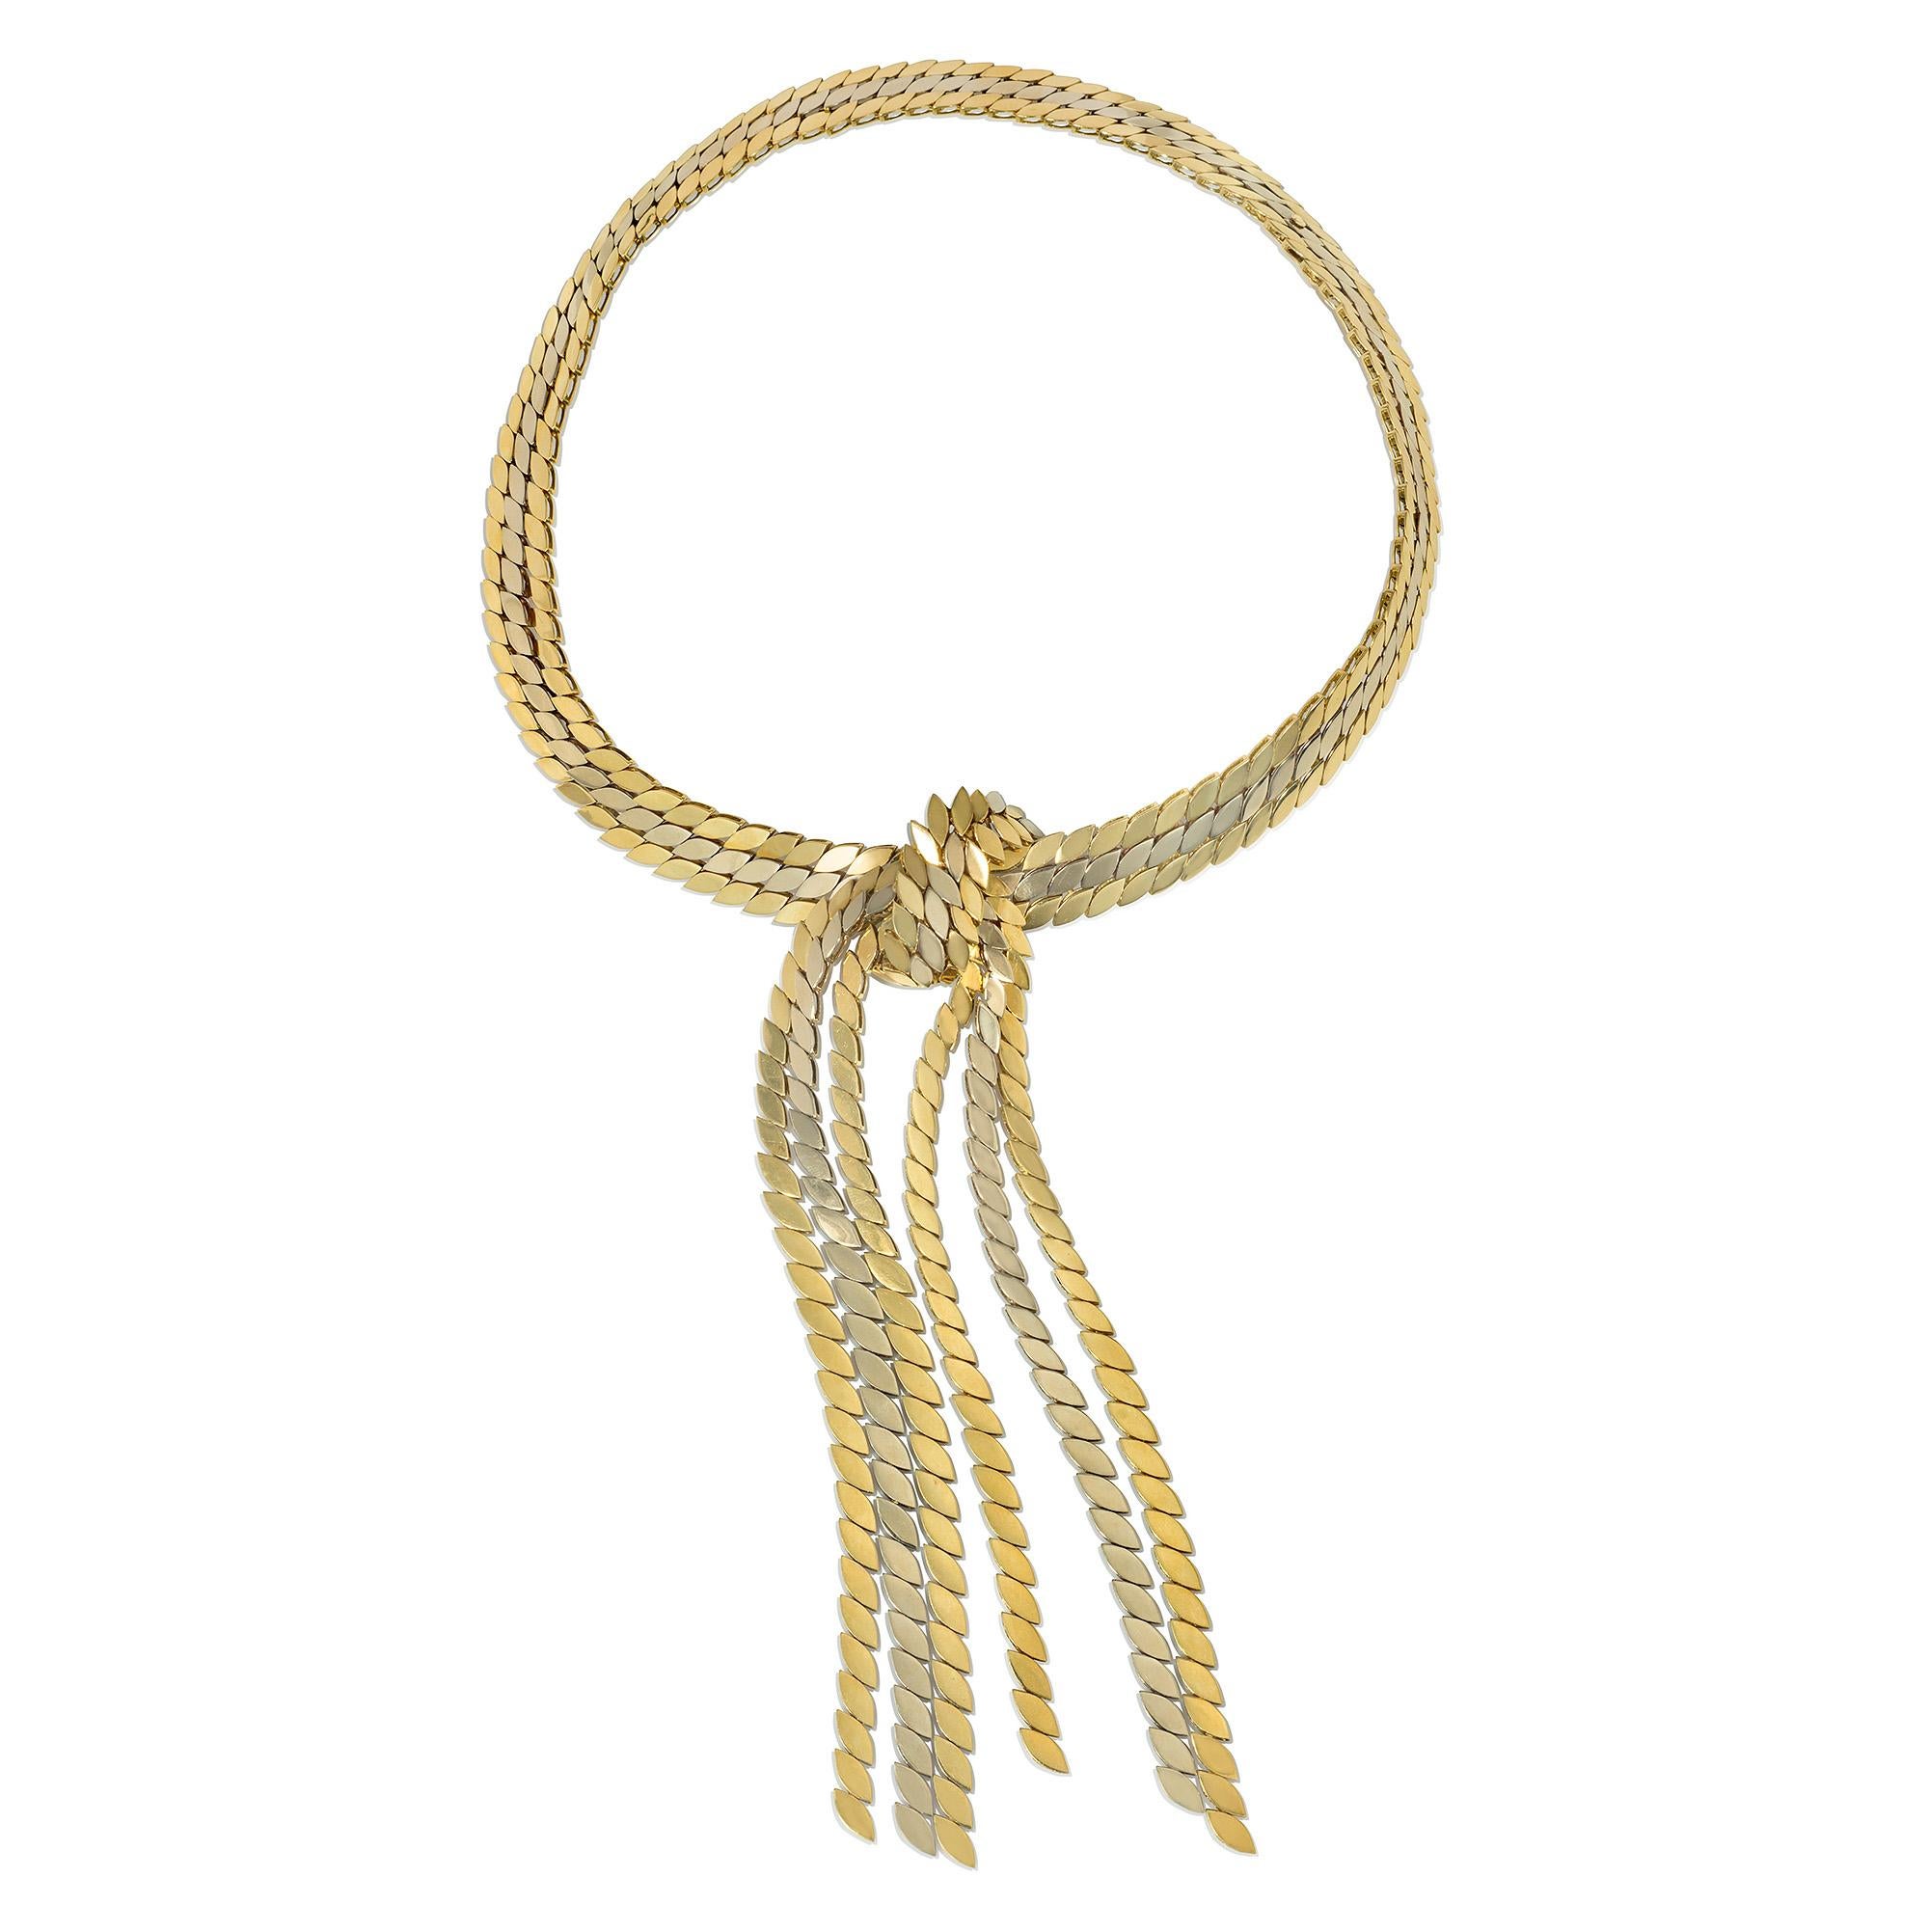 A two-color gold necklace comprising three rows of yellow and white gold navette-shaped links, with knotted center and long cascading tassel terminals, in 18k.  Maison Gerard, France.  #4648.

Dimensions: 16.5